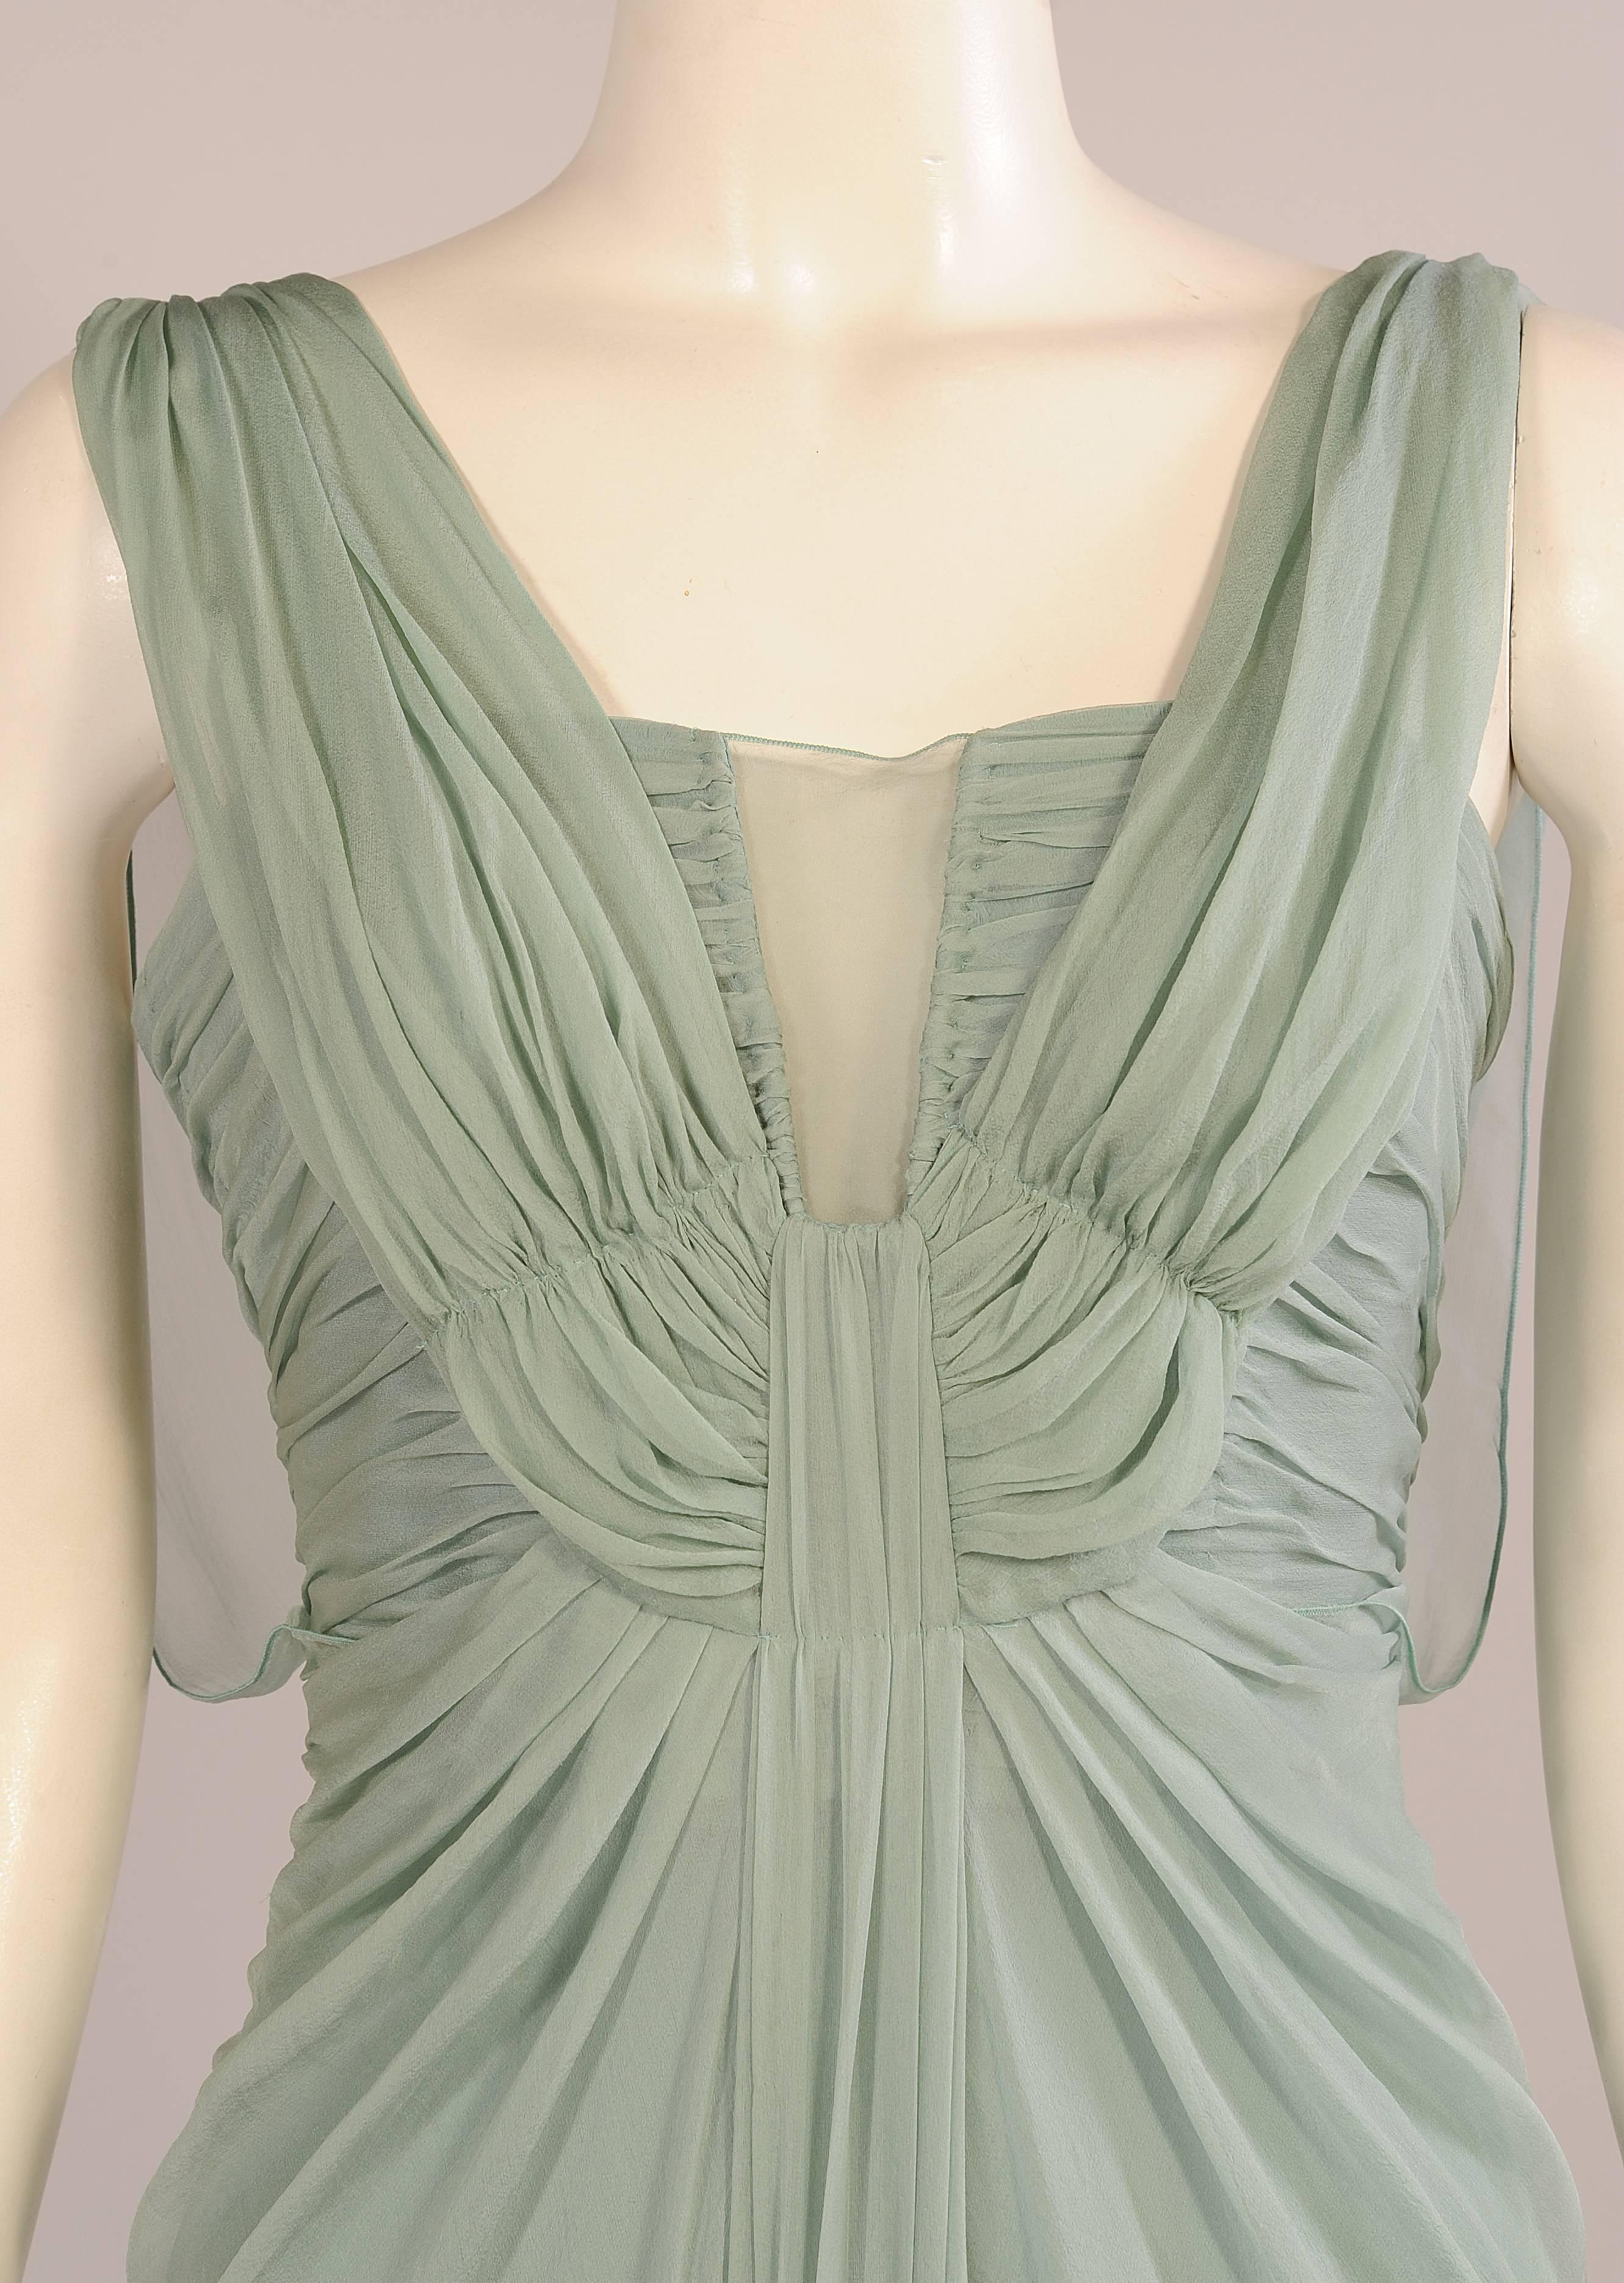 Elegant, feminine, glamorous are all excellent ways to describe this never worn Alberta Ferretti silk chiffon evening gown. It is the color of beach glass.  The boned bodice has narrow straps under the chiffon straps that continue to the center of